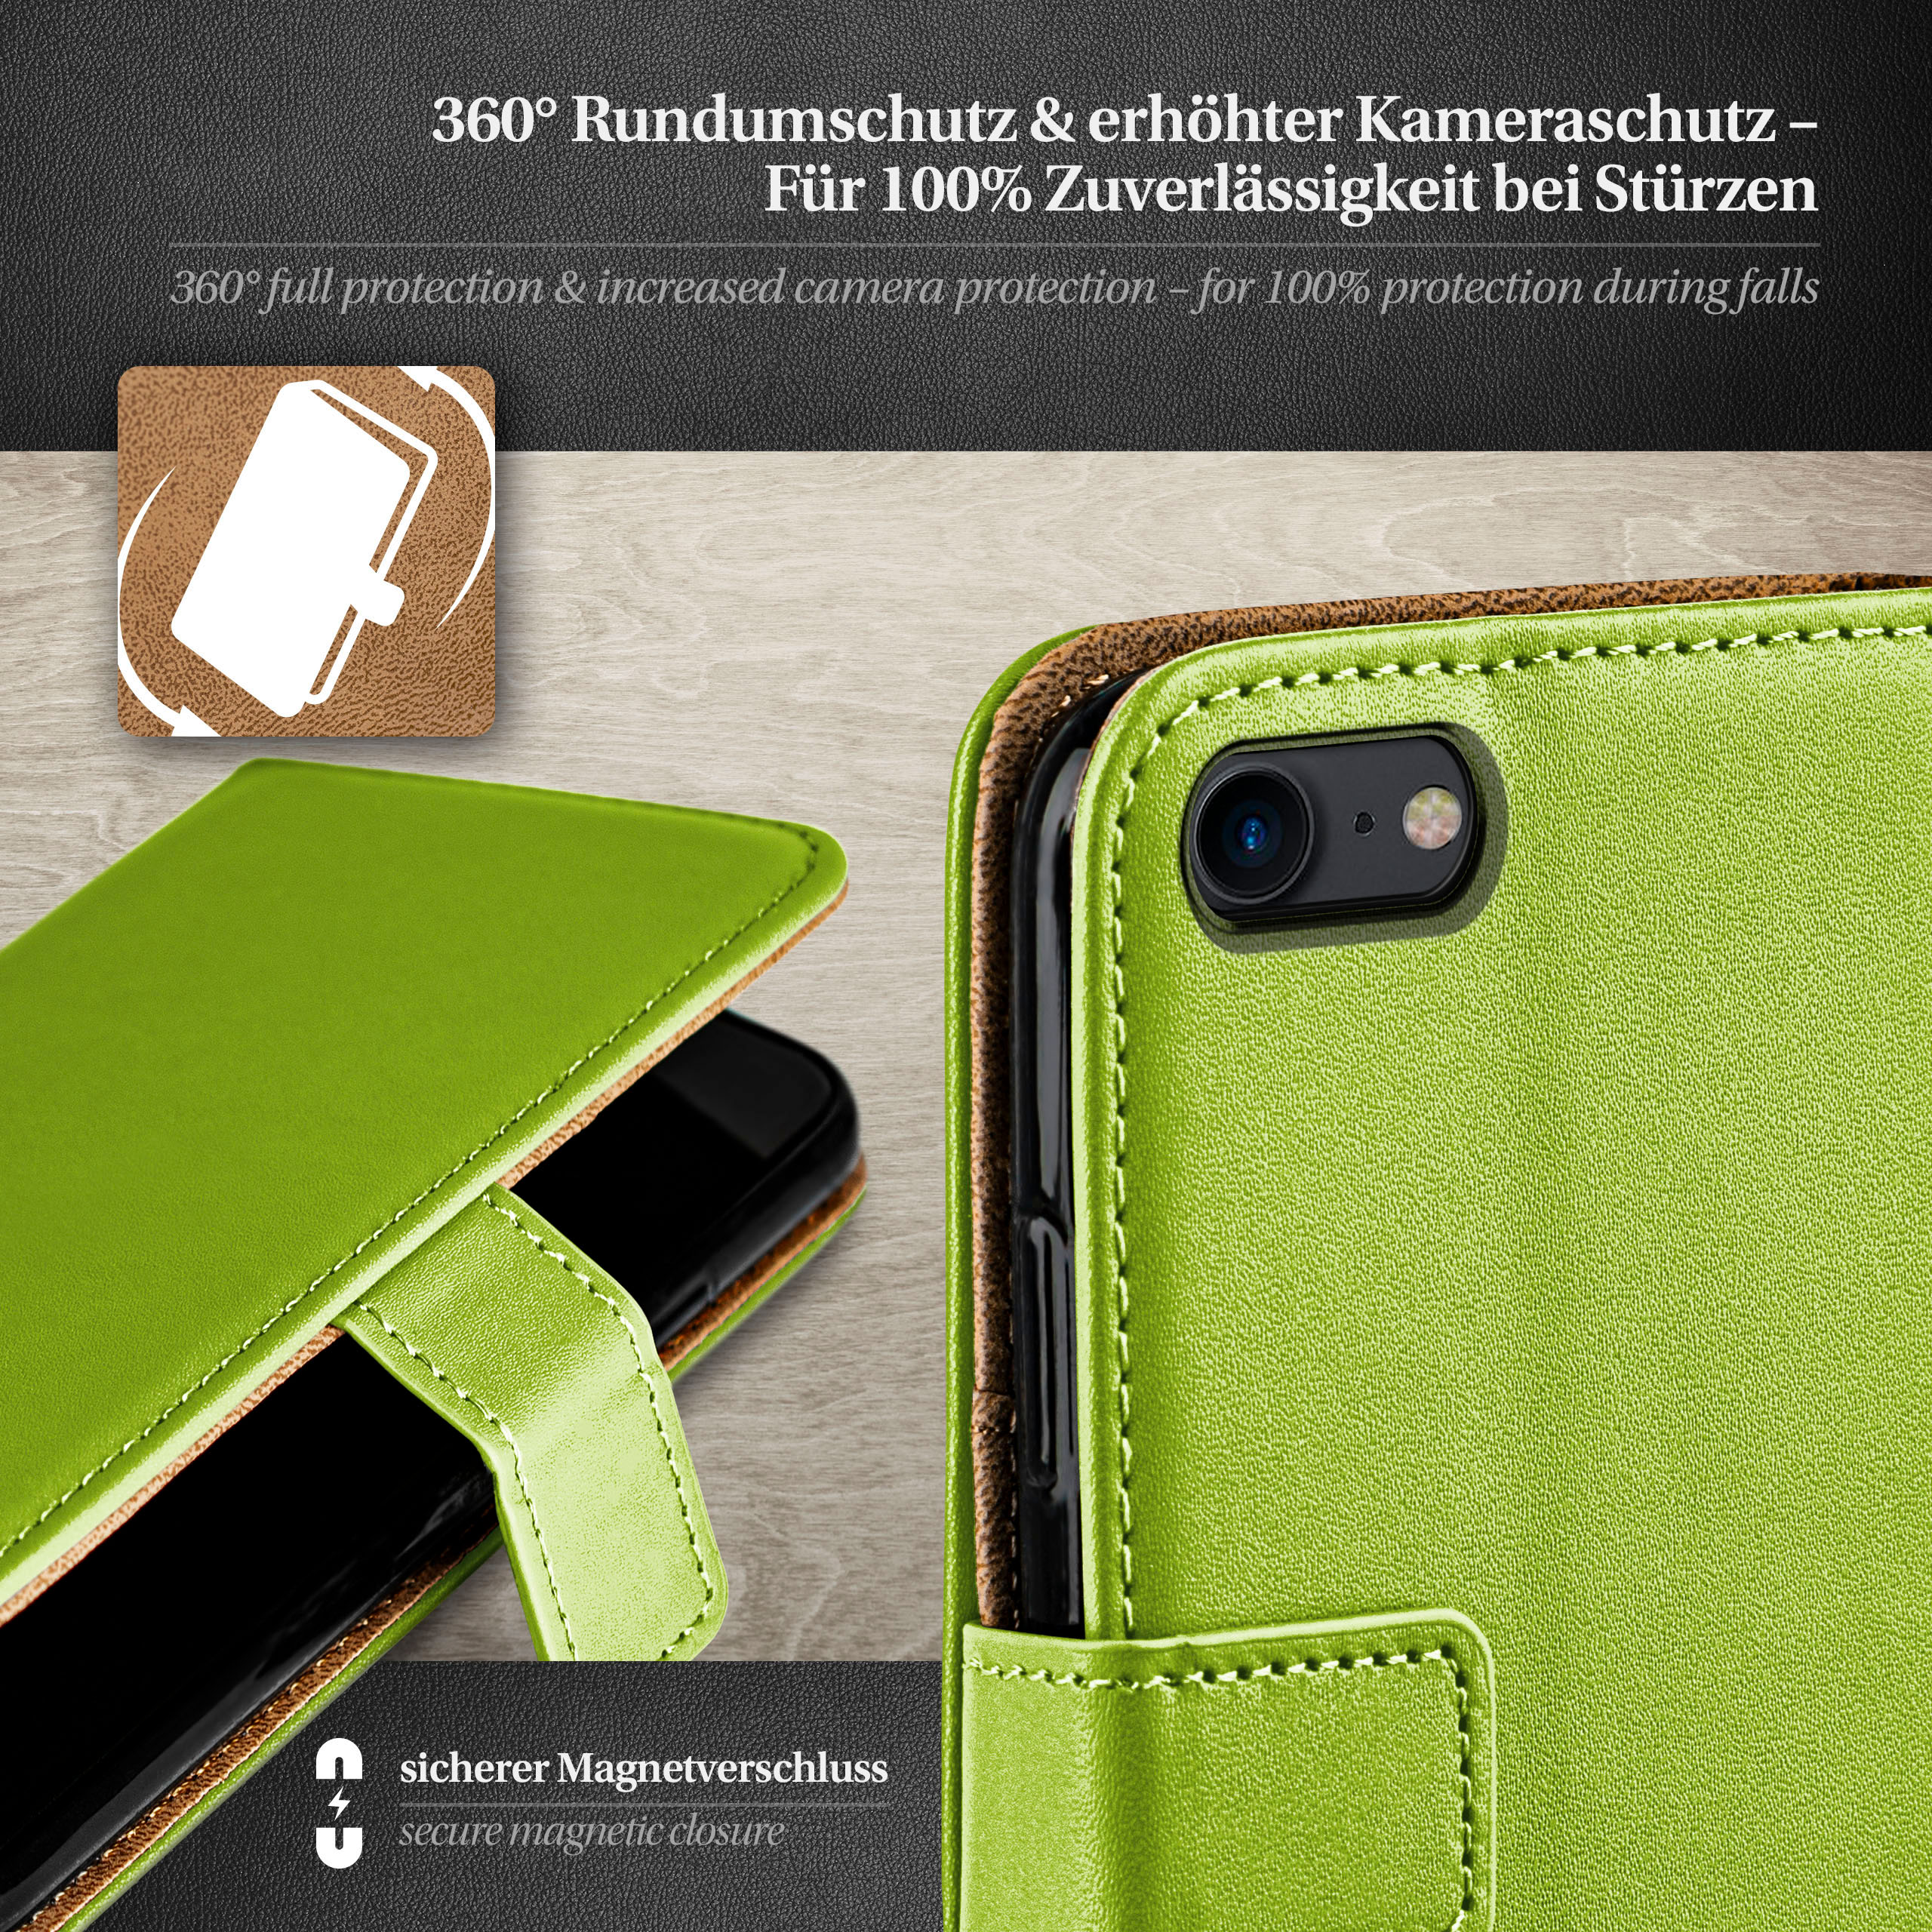 Lime-Green Bookcover, / Case, iPhone MOEX 7 Apple, 8, iPhone Book